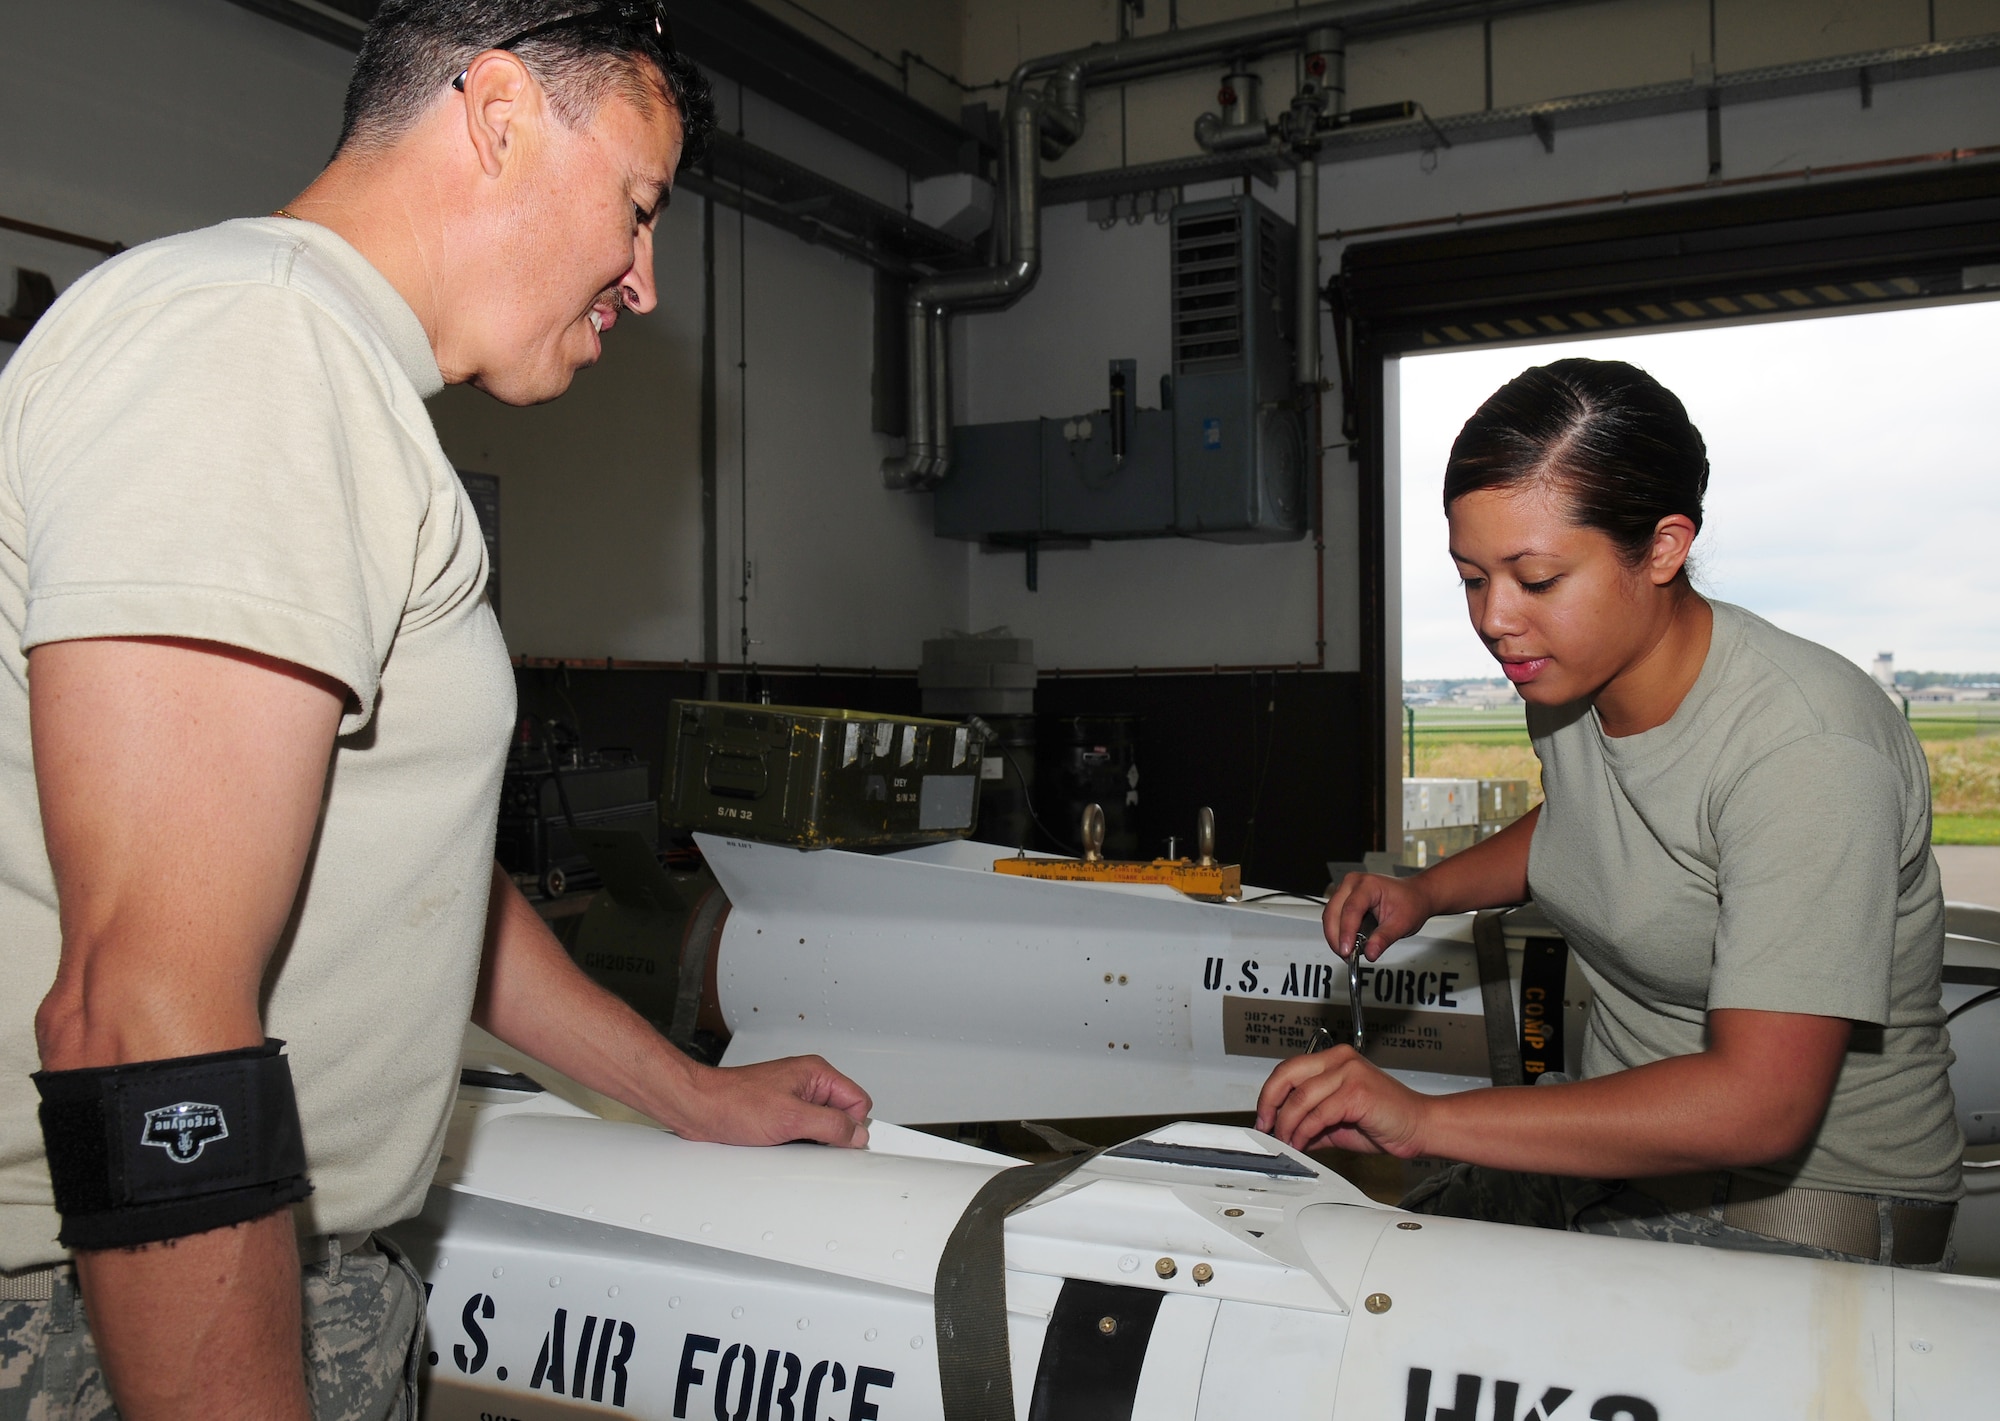 U.S. Air Force Master Sgt. Eugene Rinaldi (left), Air Force Reserve Ammunition Team member, and Airman 1st Class Ritchlyn Fryman, 86th Munitions Squadron precision guided munitions crew member, remove the guidance control section of an AGM-65 Maverick missile system for upgrades Aug. 11, 2009, Ramstein Air Base, Germany. More than 70 missiles were enhanced with a new software circuit card which allows for more accuracy and adds an abort code for pilots. (U.S. Air Force photo by Staff Sgt. Jocelyn Rich)